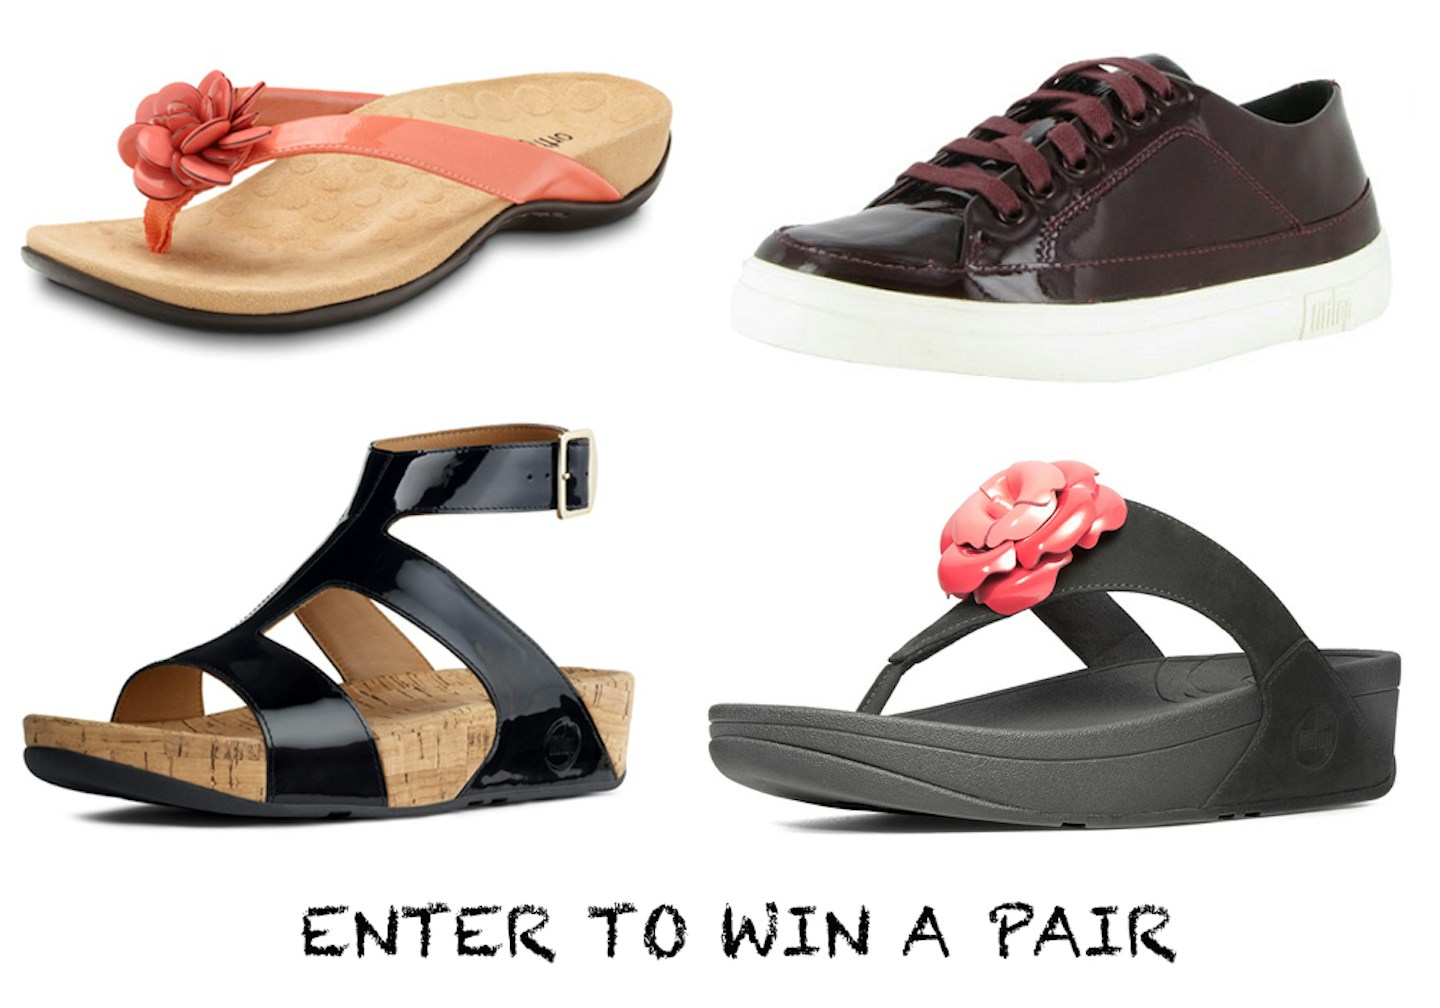 Sole Provisions giveaway: enter to win a pair of FitFlops or Ortha Heels!